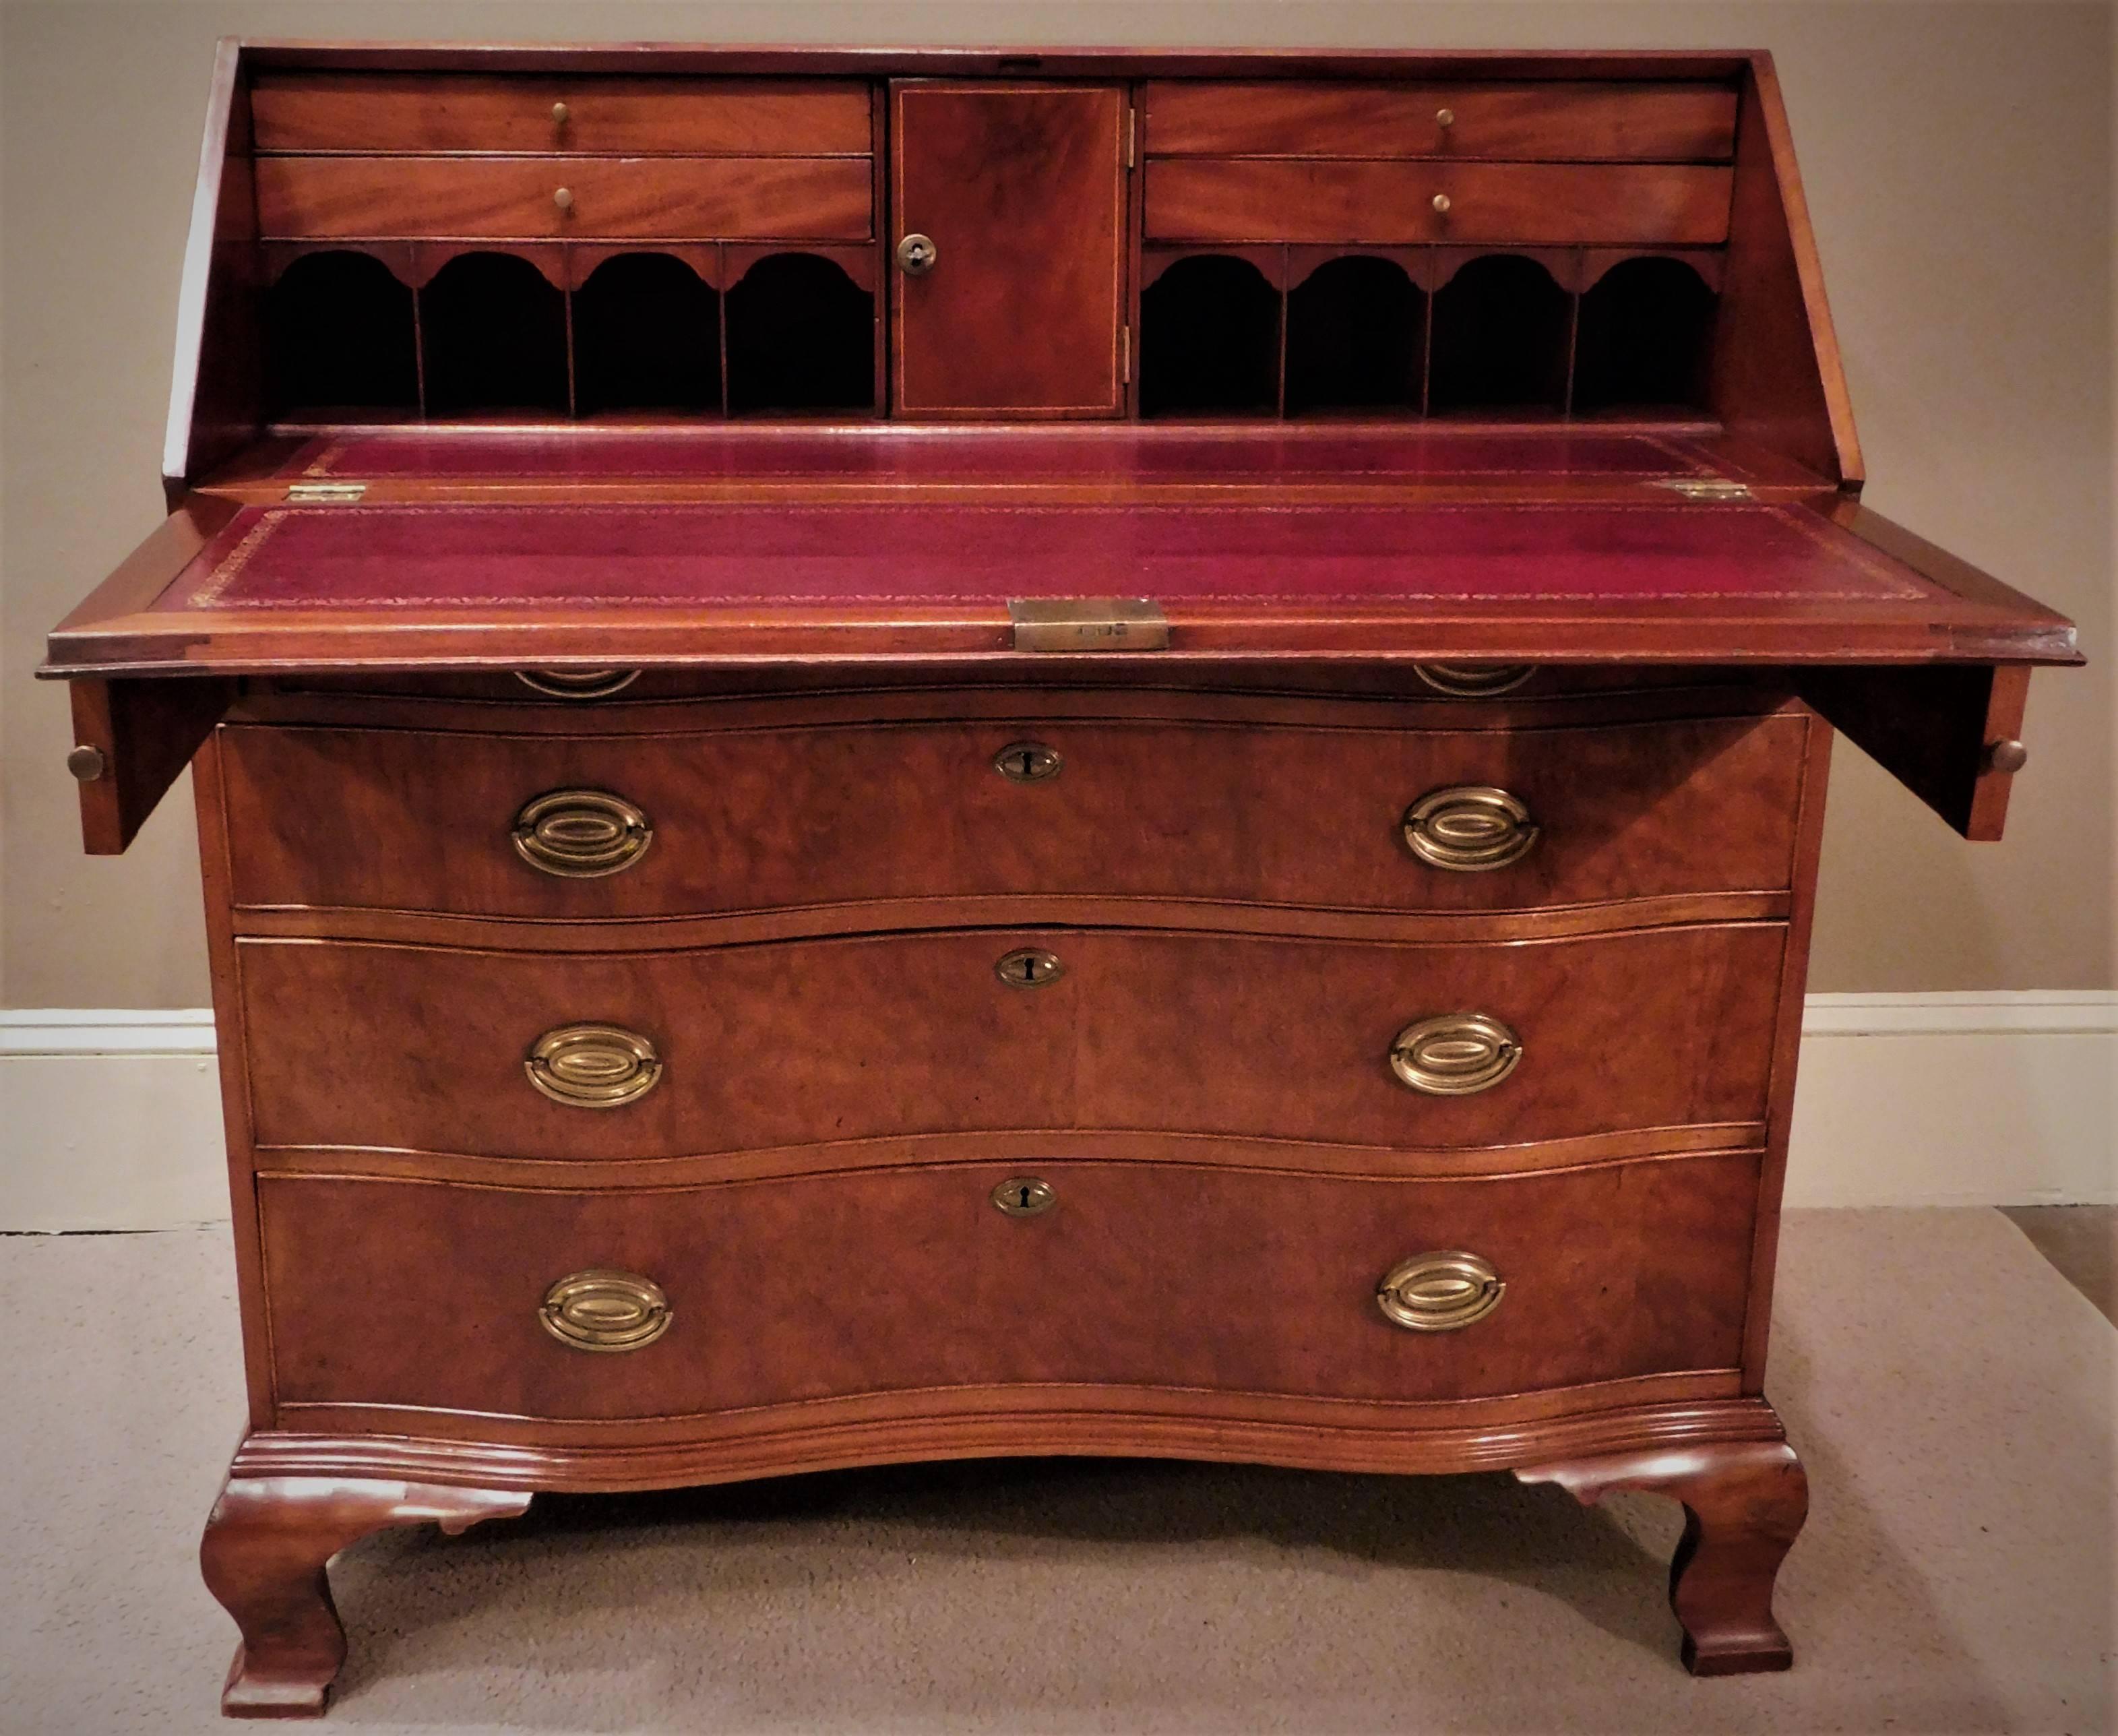 This Georgian slant front desk is made of walnut and pollarded walnut with pine secondary wood and replaced brass Hepplewhite pulls. The desk has a leather writing surface, a fitted interior with six small drawers and one door, over four oxbow